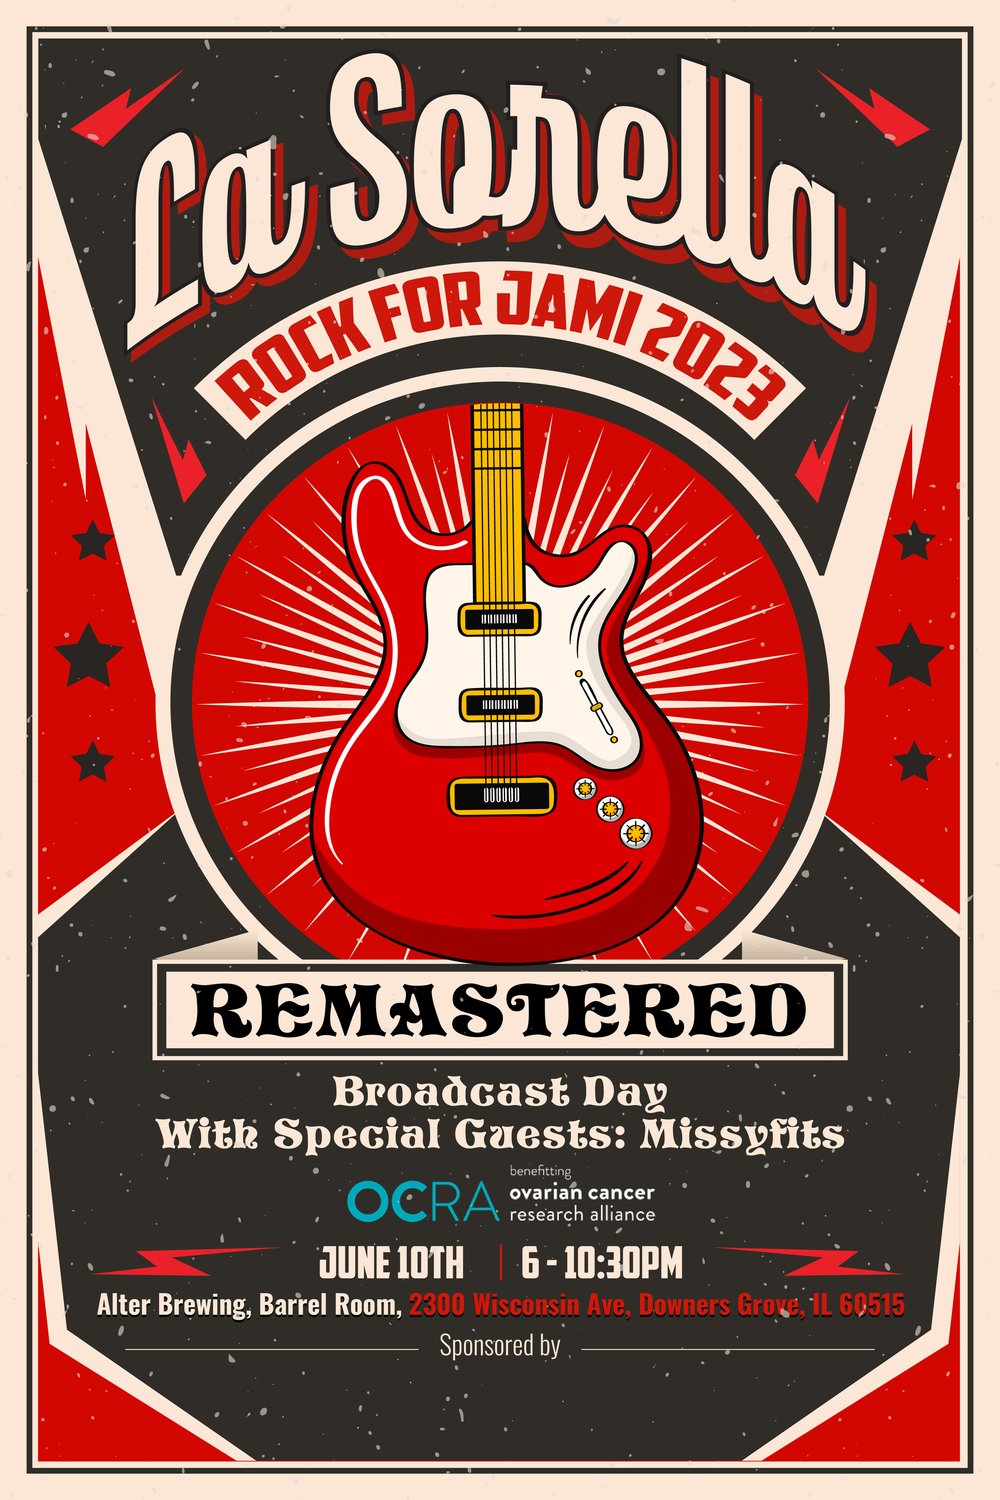 Graphic flyer with red and white electric guitar design. Text reads: La Sorella Rock for Jami 2023 REMASTERED